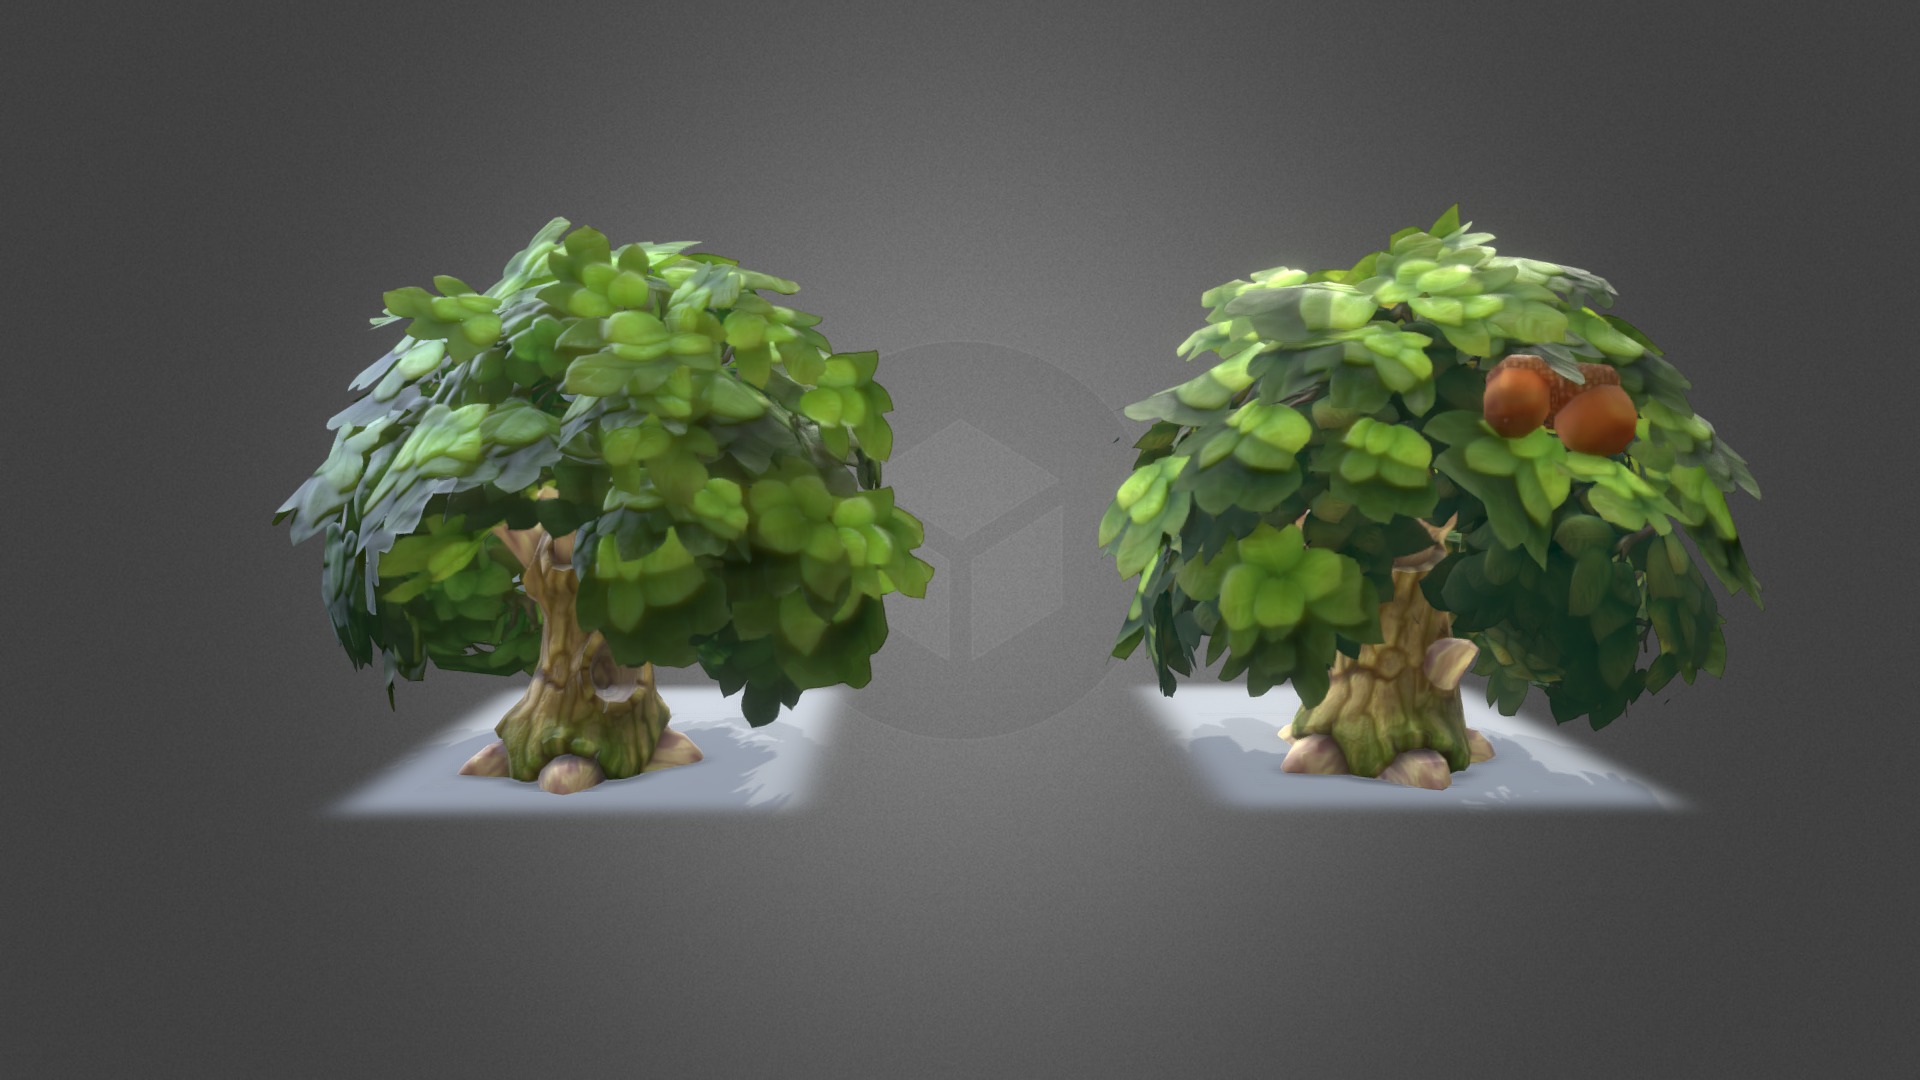 3D model LowPoly Trees 2k - This is a 3D model of the LowPoly Trees 2k. The 3D model is about a couple of small plants.